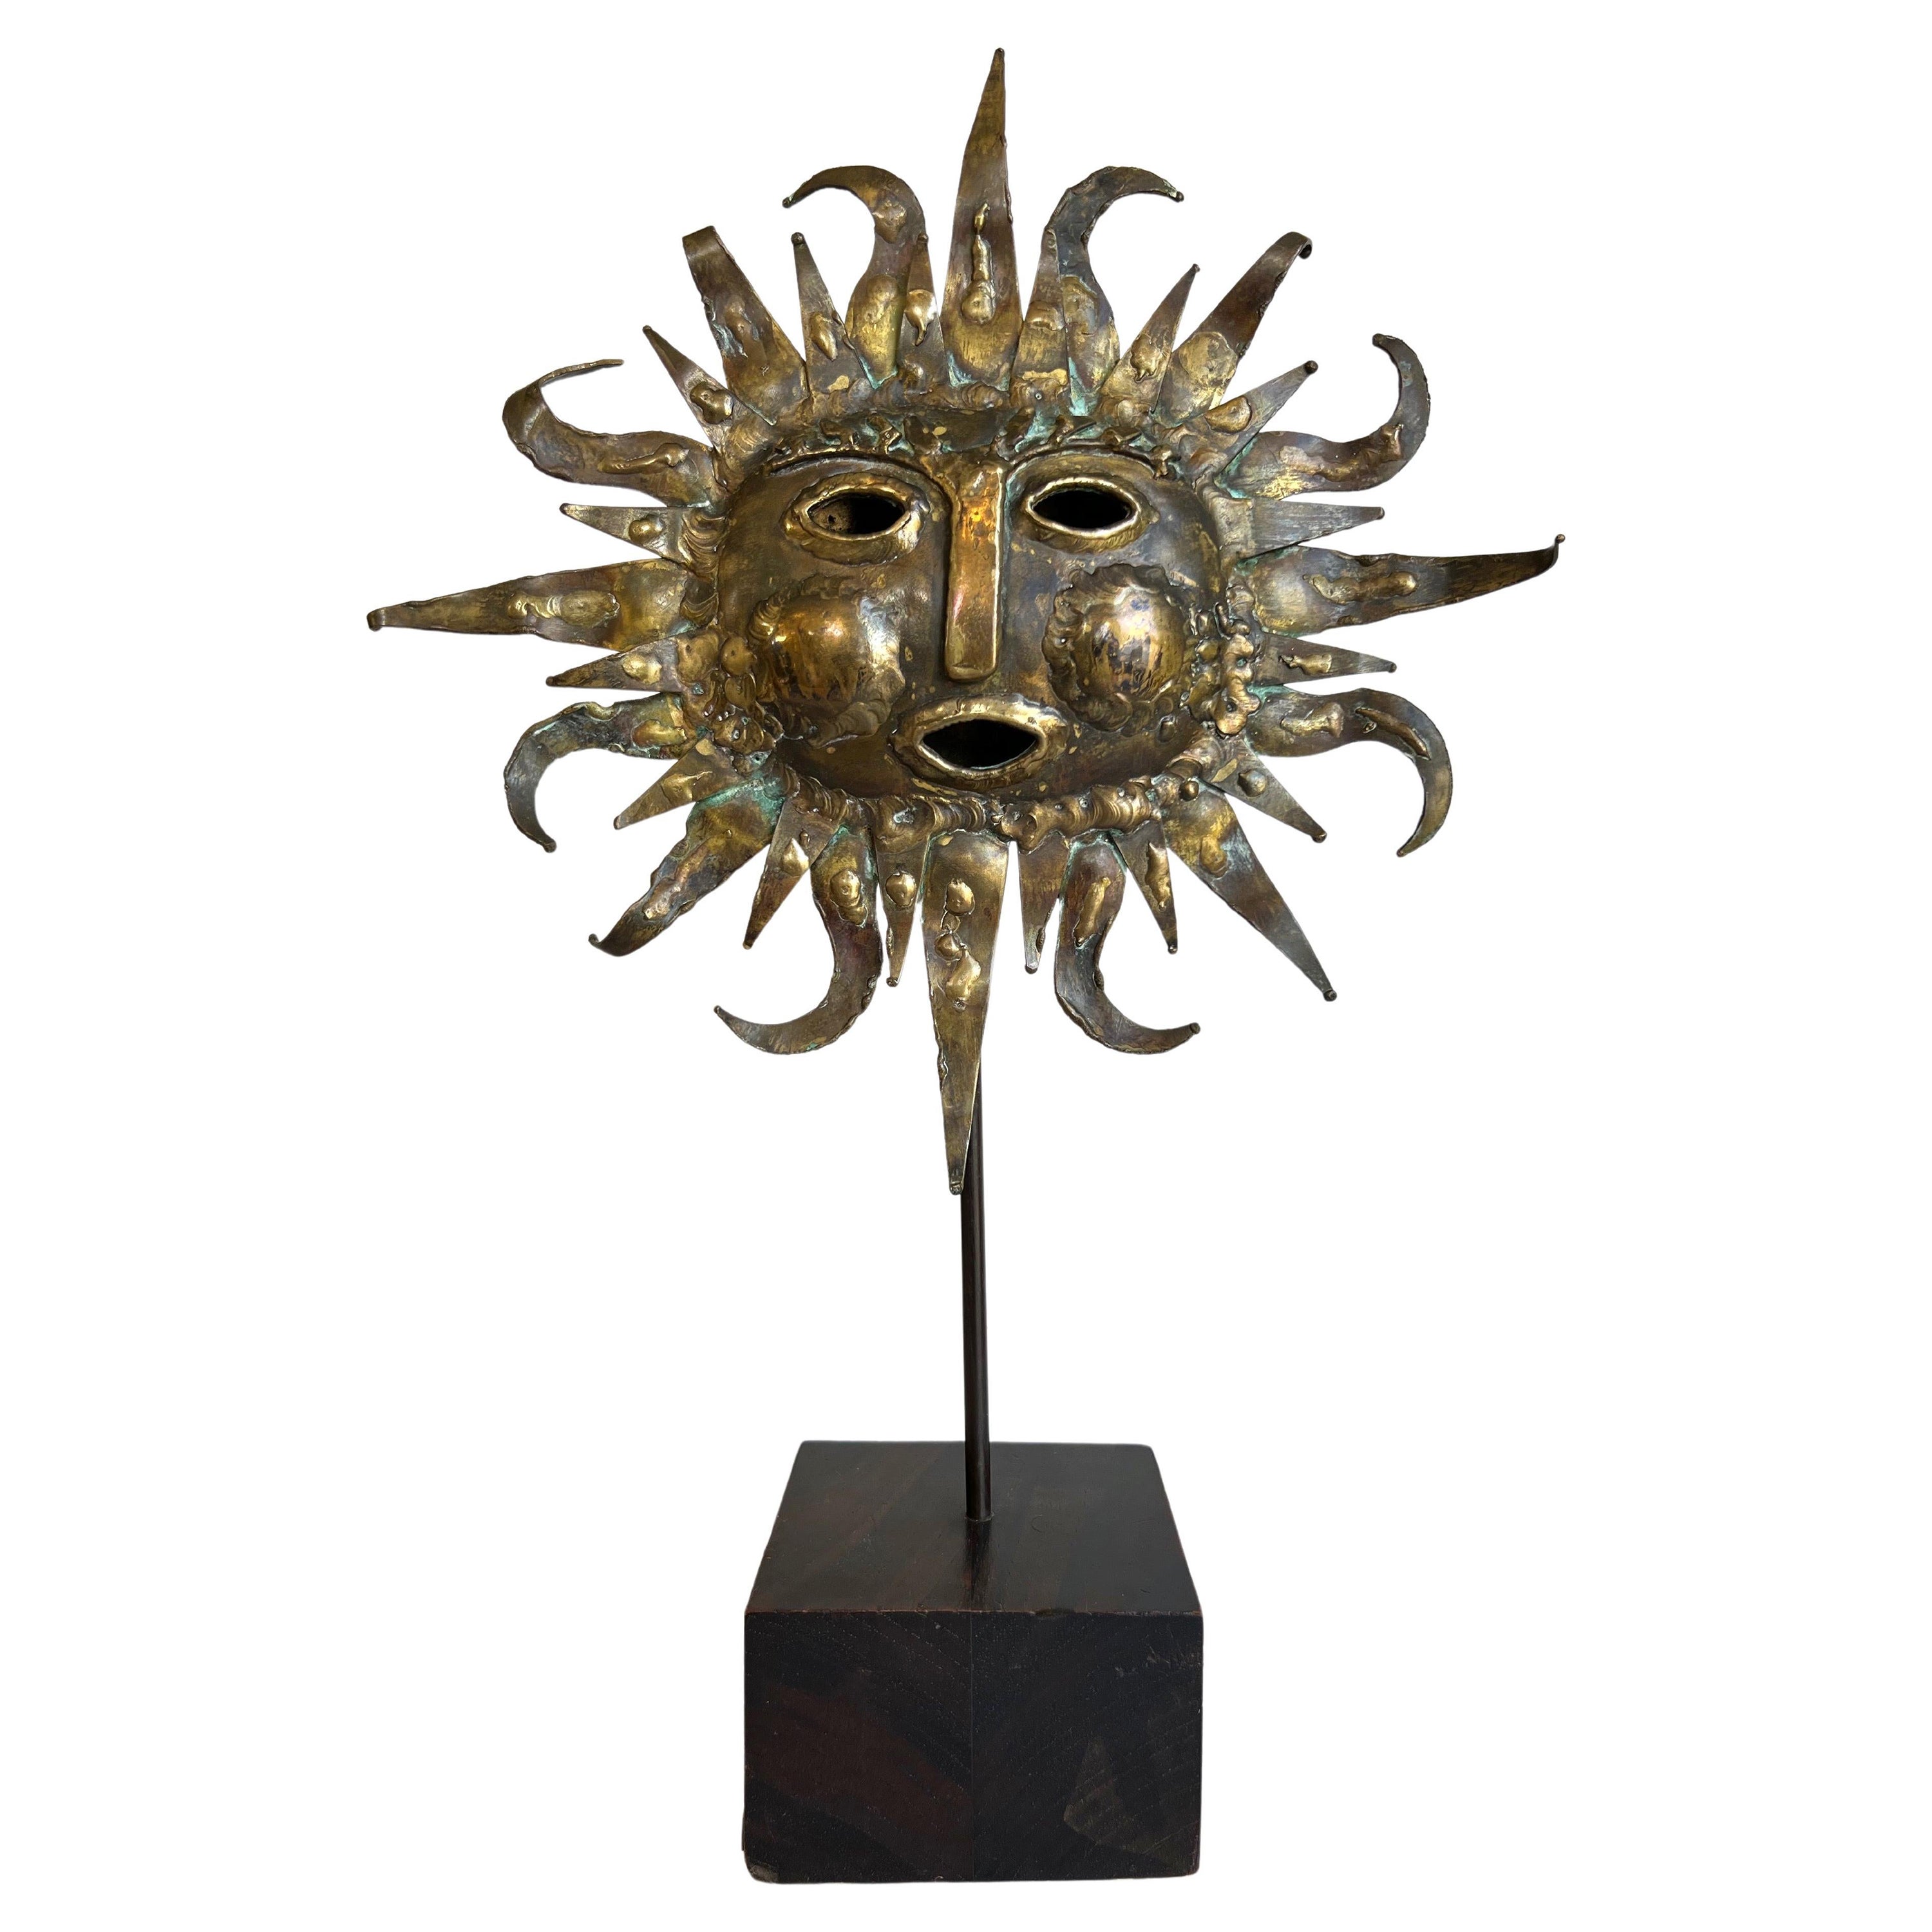 Emaús Brutalist Brass and Bronze Sun Face Sculpture on Stand, Signed, 1960s